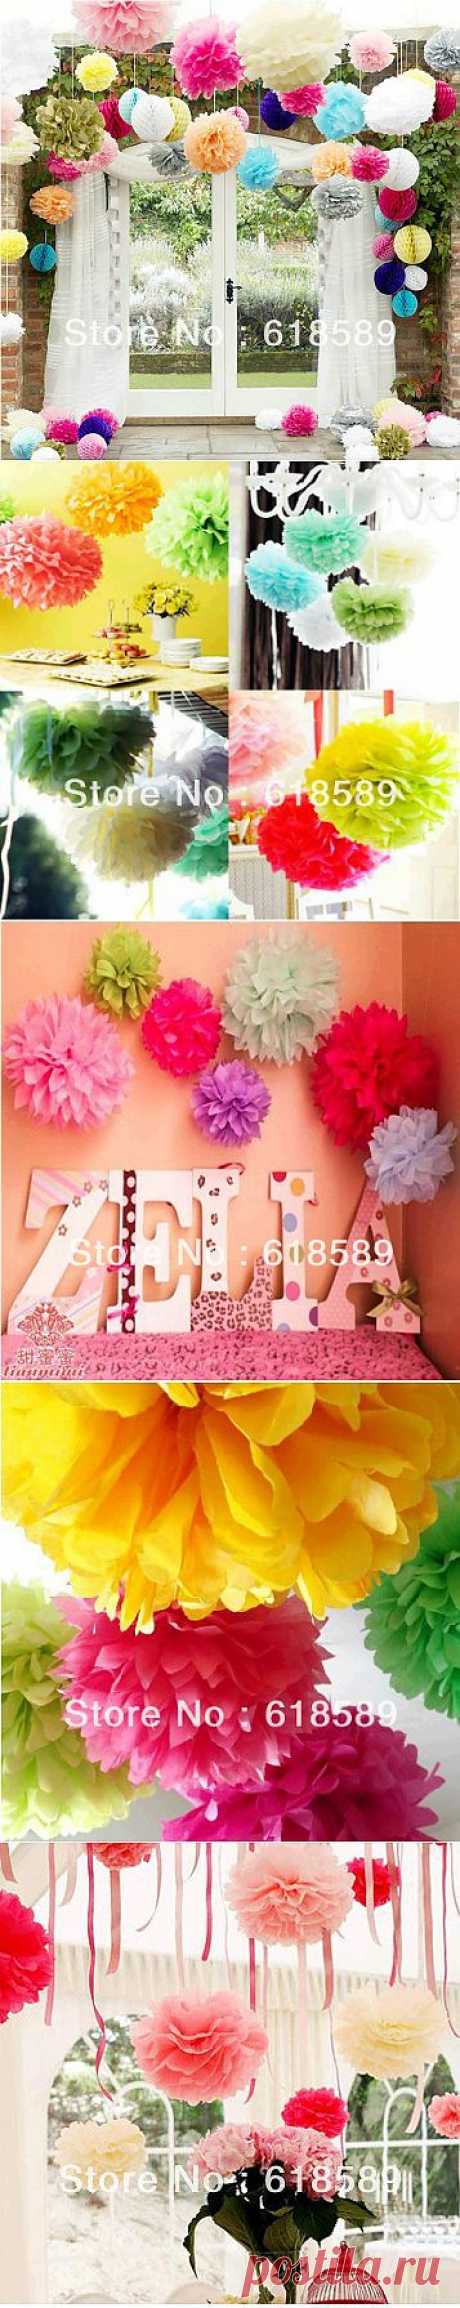 craft paper supplies Picture - More Detailed Picture about Free Shipping 15 pcs 25cm(10inch) Tissue Paper Pom Poms Wedding Party Decor Craft Paper Flower For Wedding Decoration Picture in from Professional Balloon World .